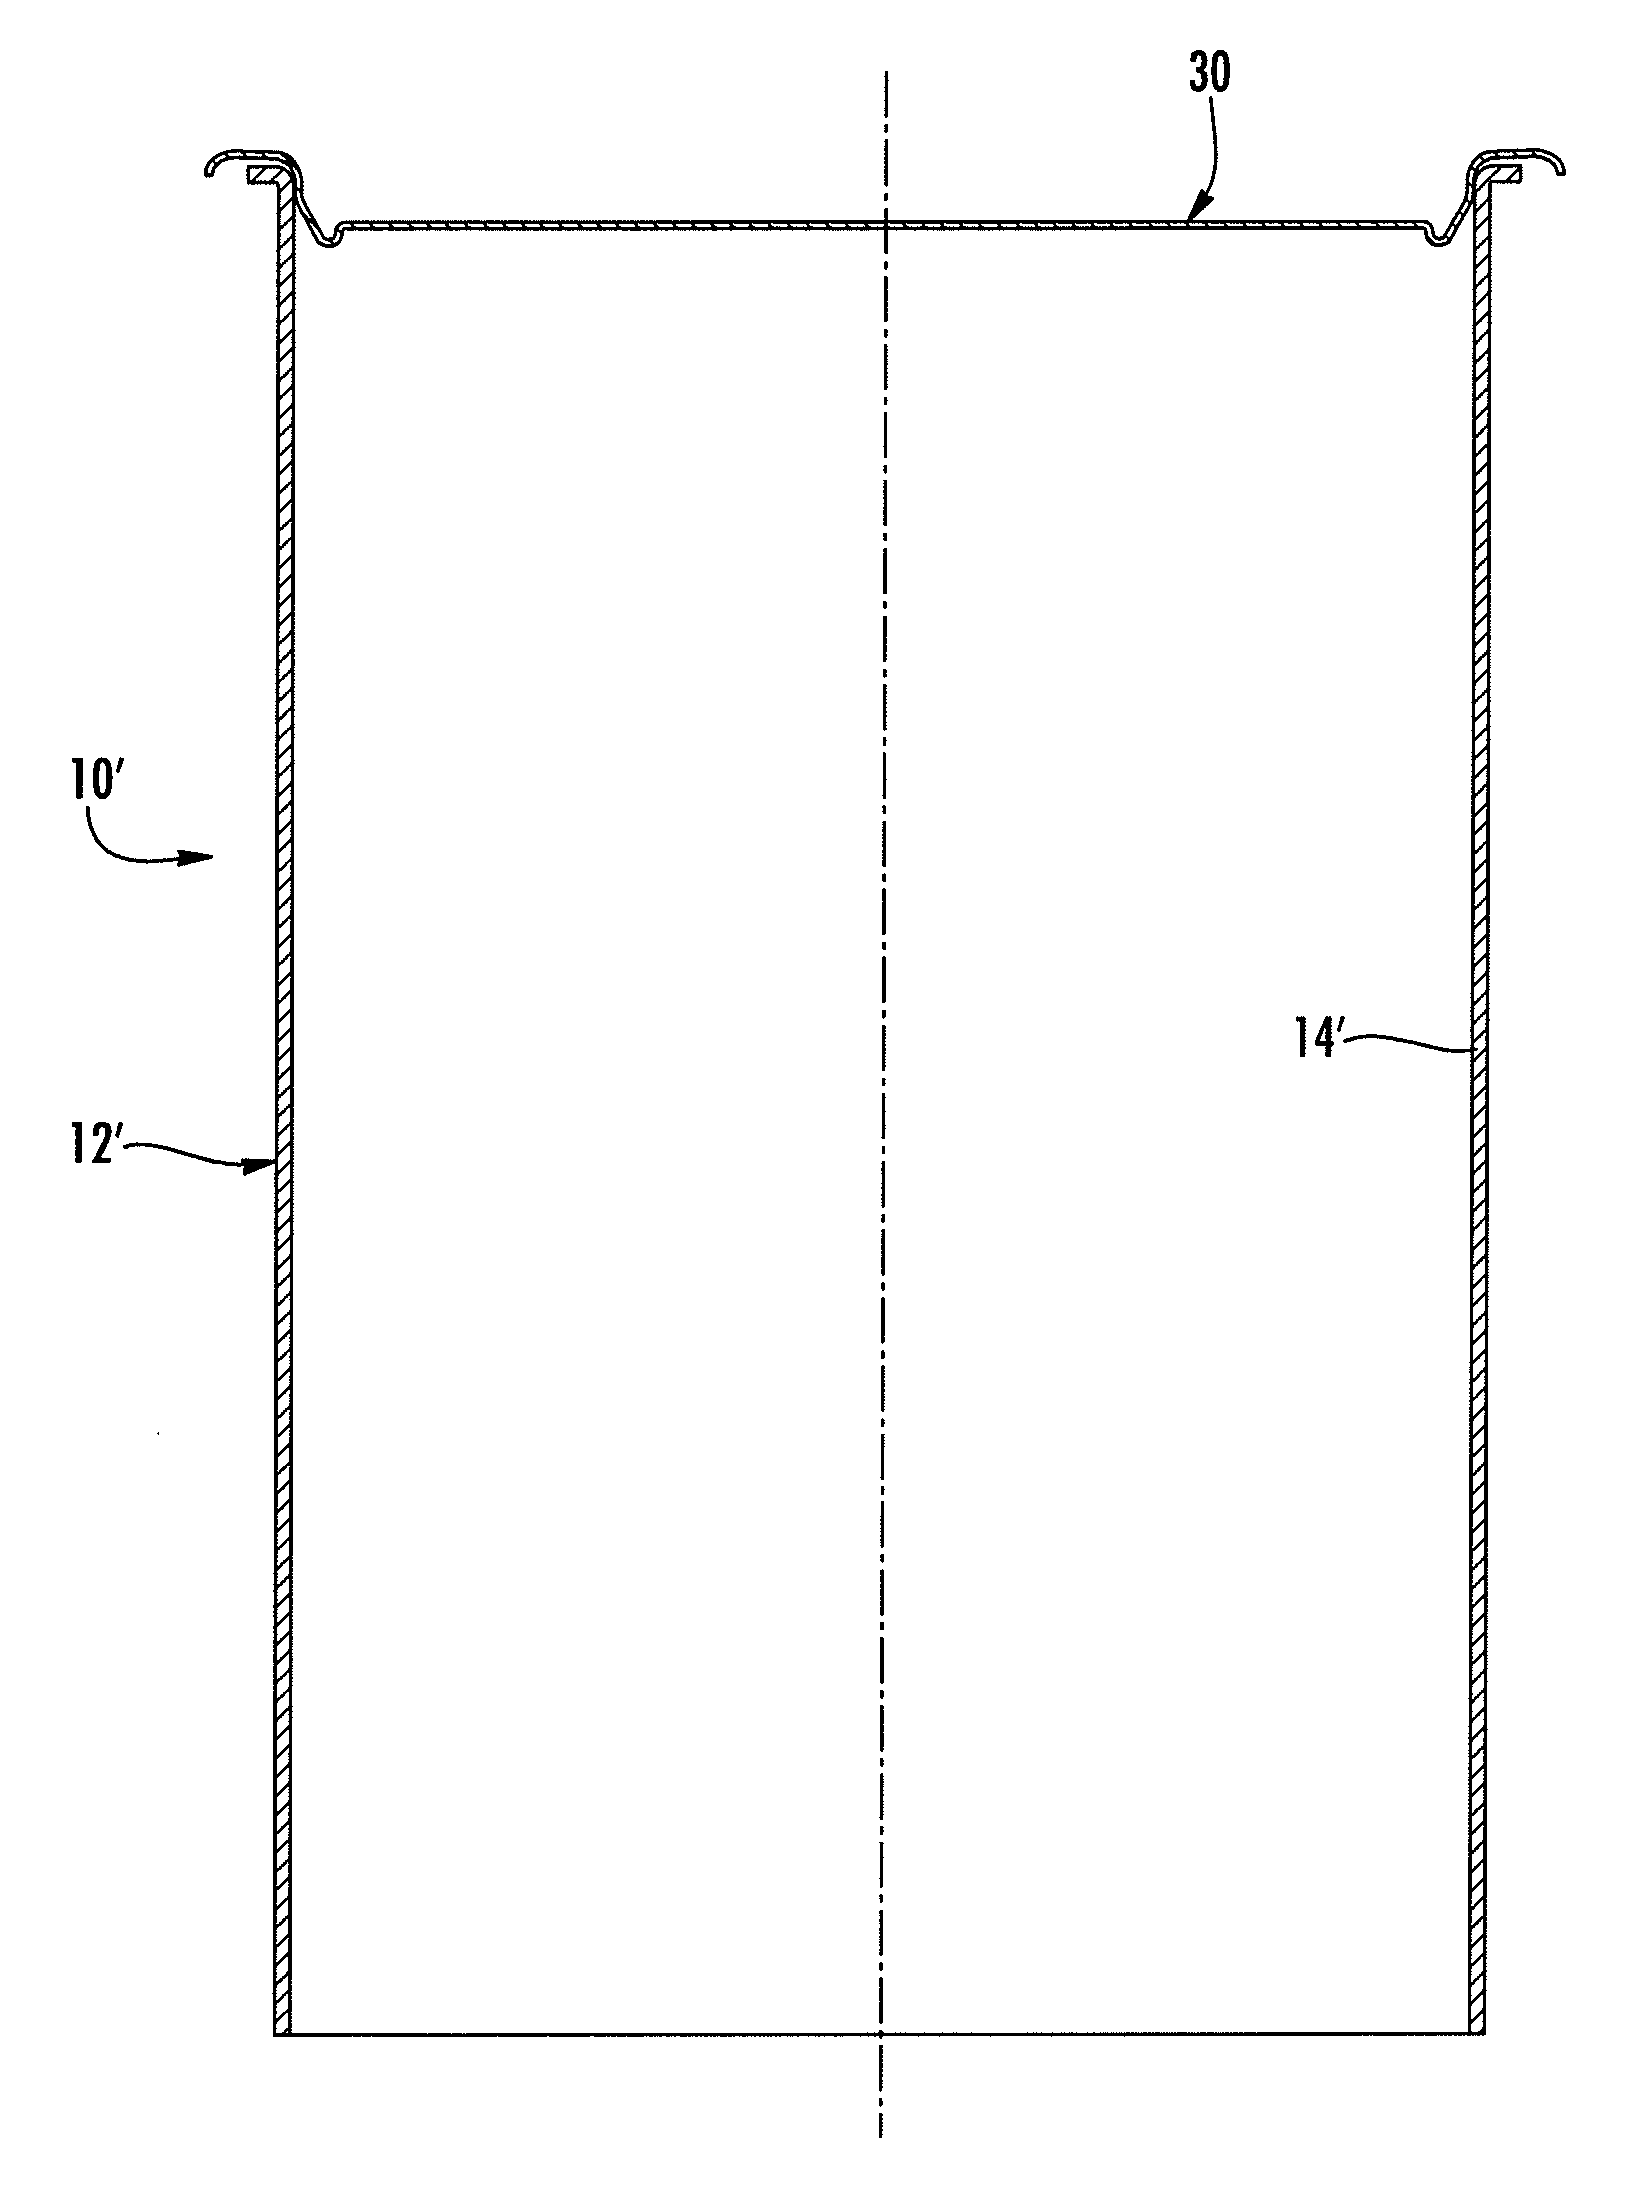 Method for Applying a Metal End to a Container Body